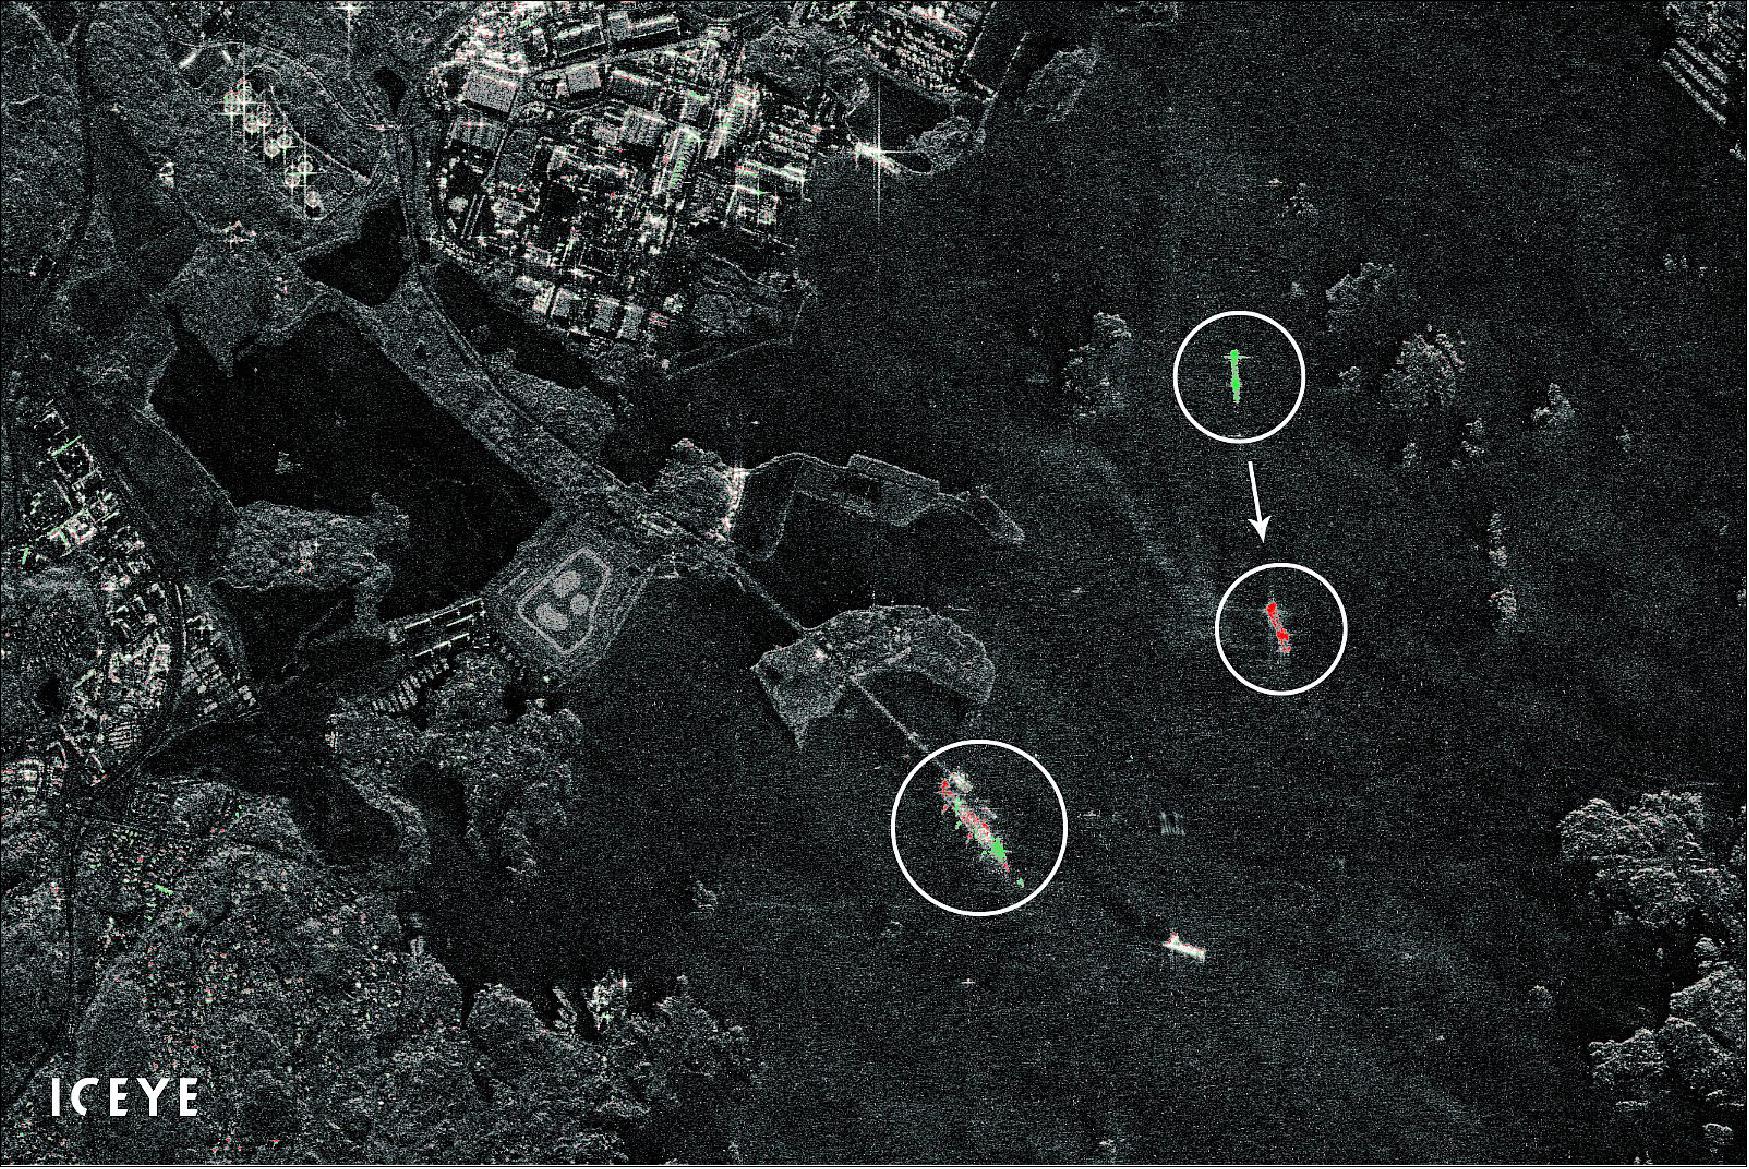 Figure 49: In this composite visualization, vessels in the port of Gothenburg, Sweden, are detected changing their position with just minutes between two combined SAR satellite images. Elements shown in green represent the position of elements only seen in the prior image, and elements in red represent elements only in the following image. One of the vessels is leaving the port, and another is slowly approaching the oil terminal visible in the scene (image credit: ICEYE)